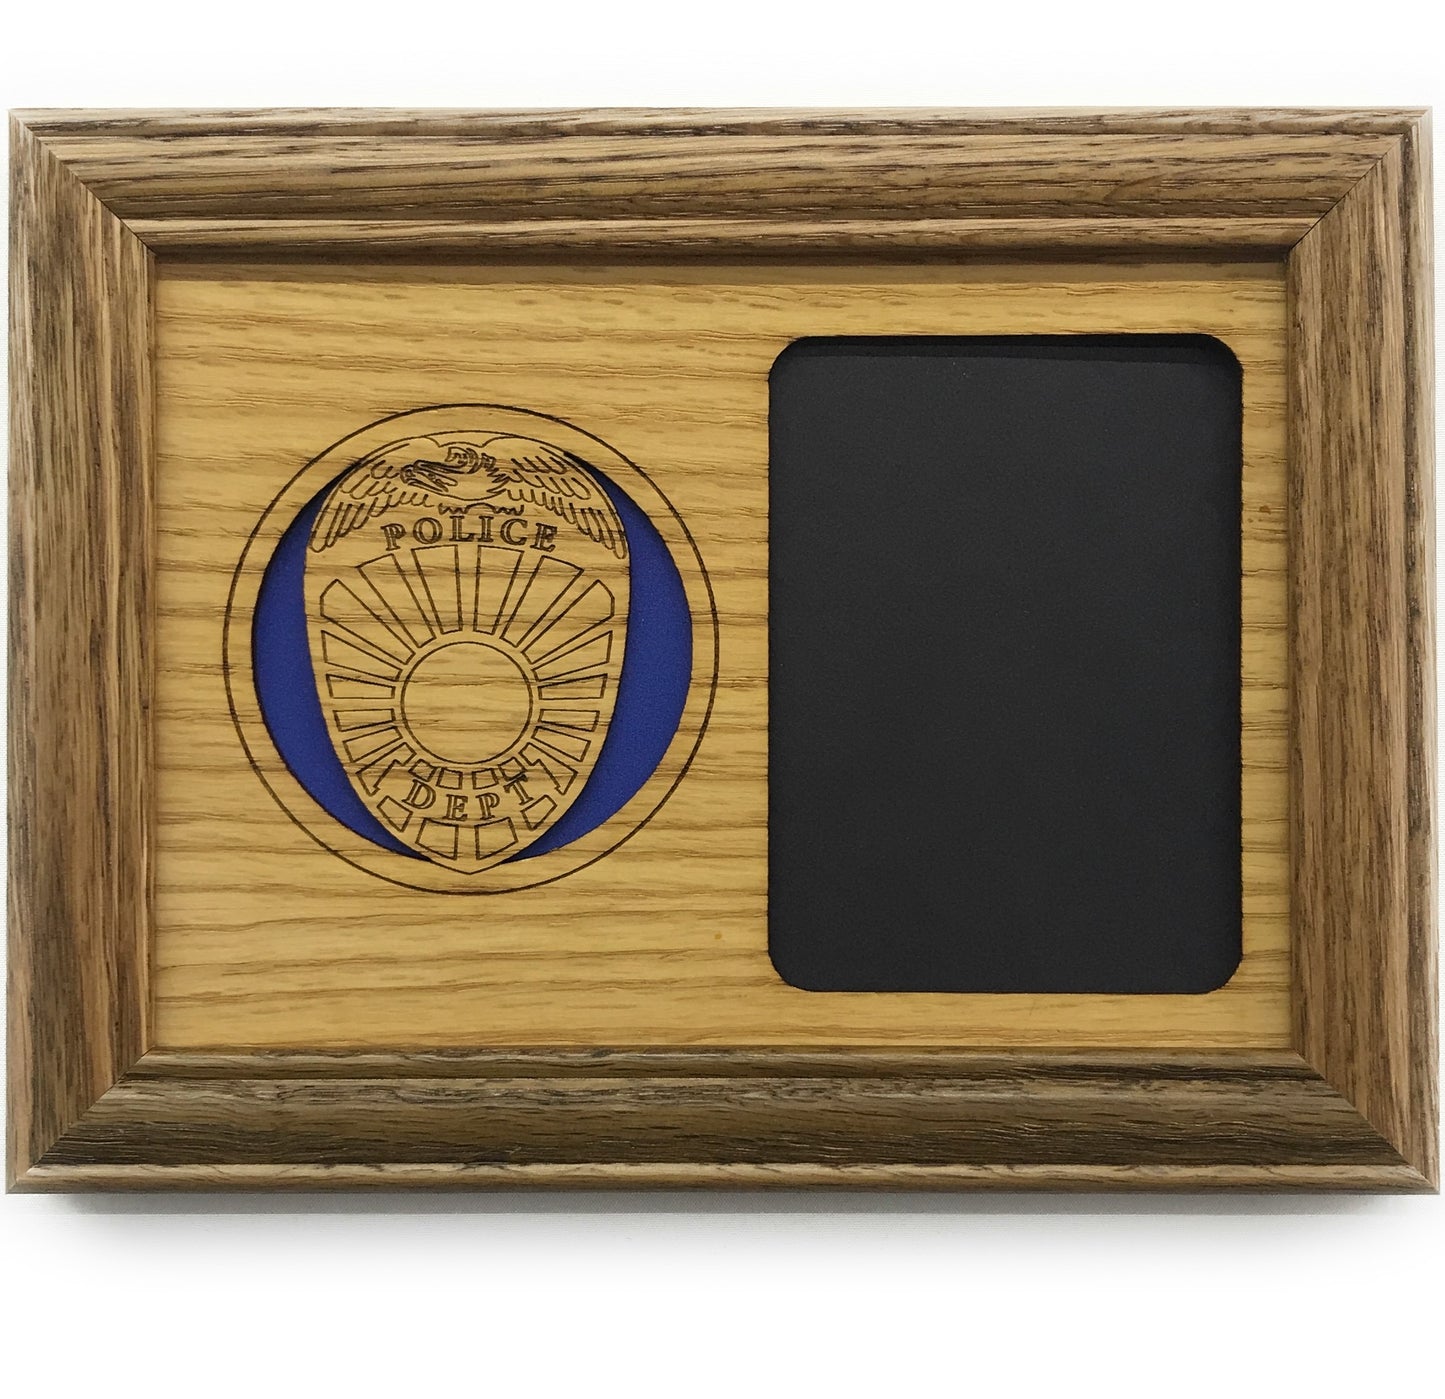 Police Badge Picture Frame - 5x7 Frame Hold 3x4 Photo